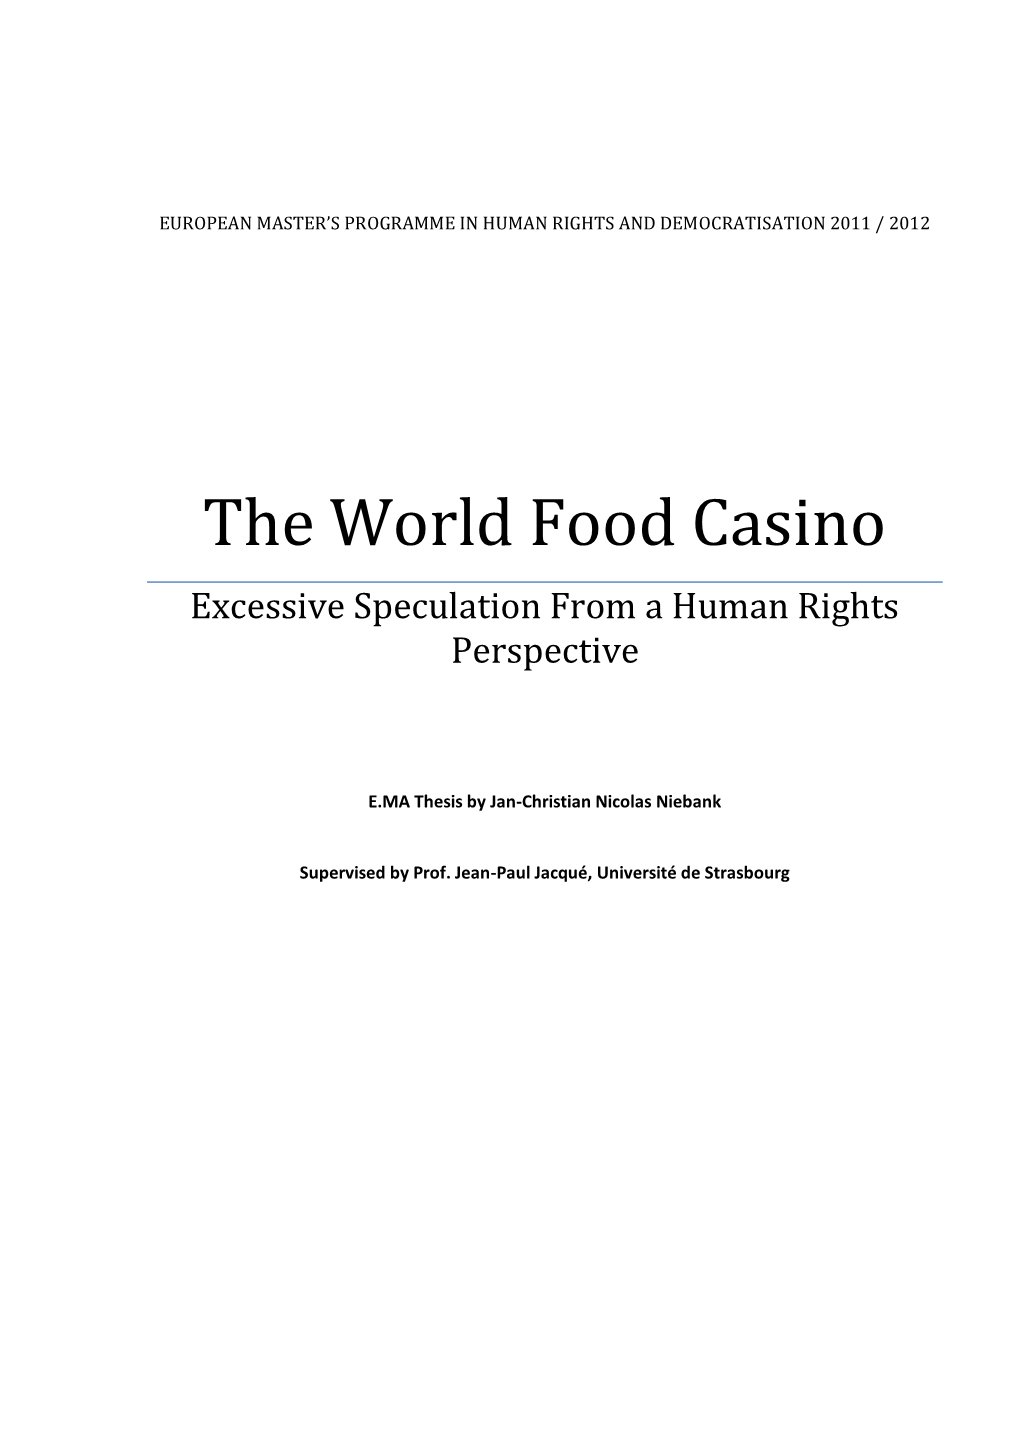 The World Food Casino Excessive Speculation from a Human Rights Perspective